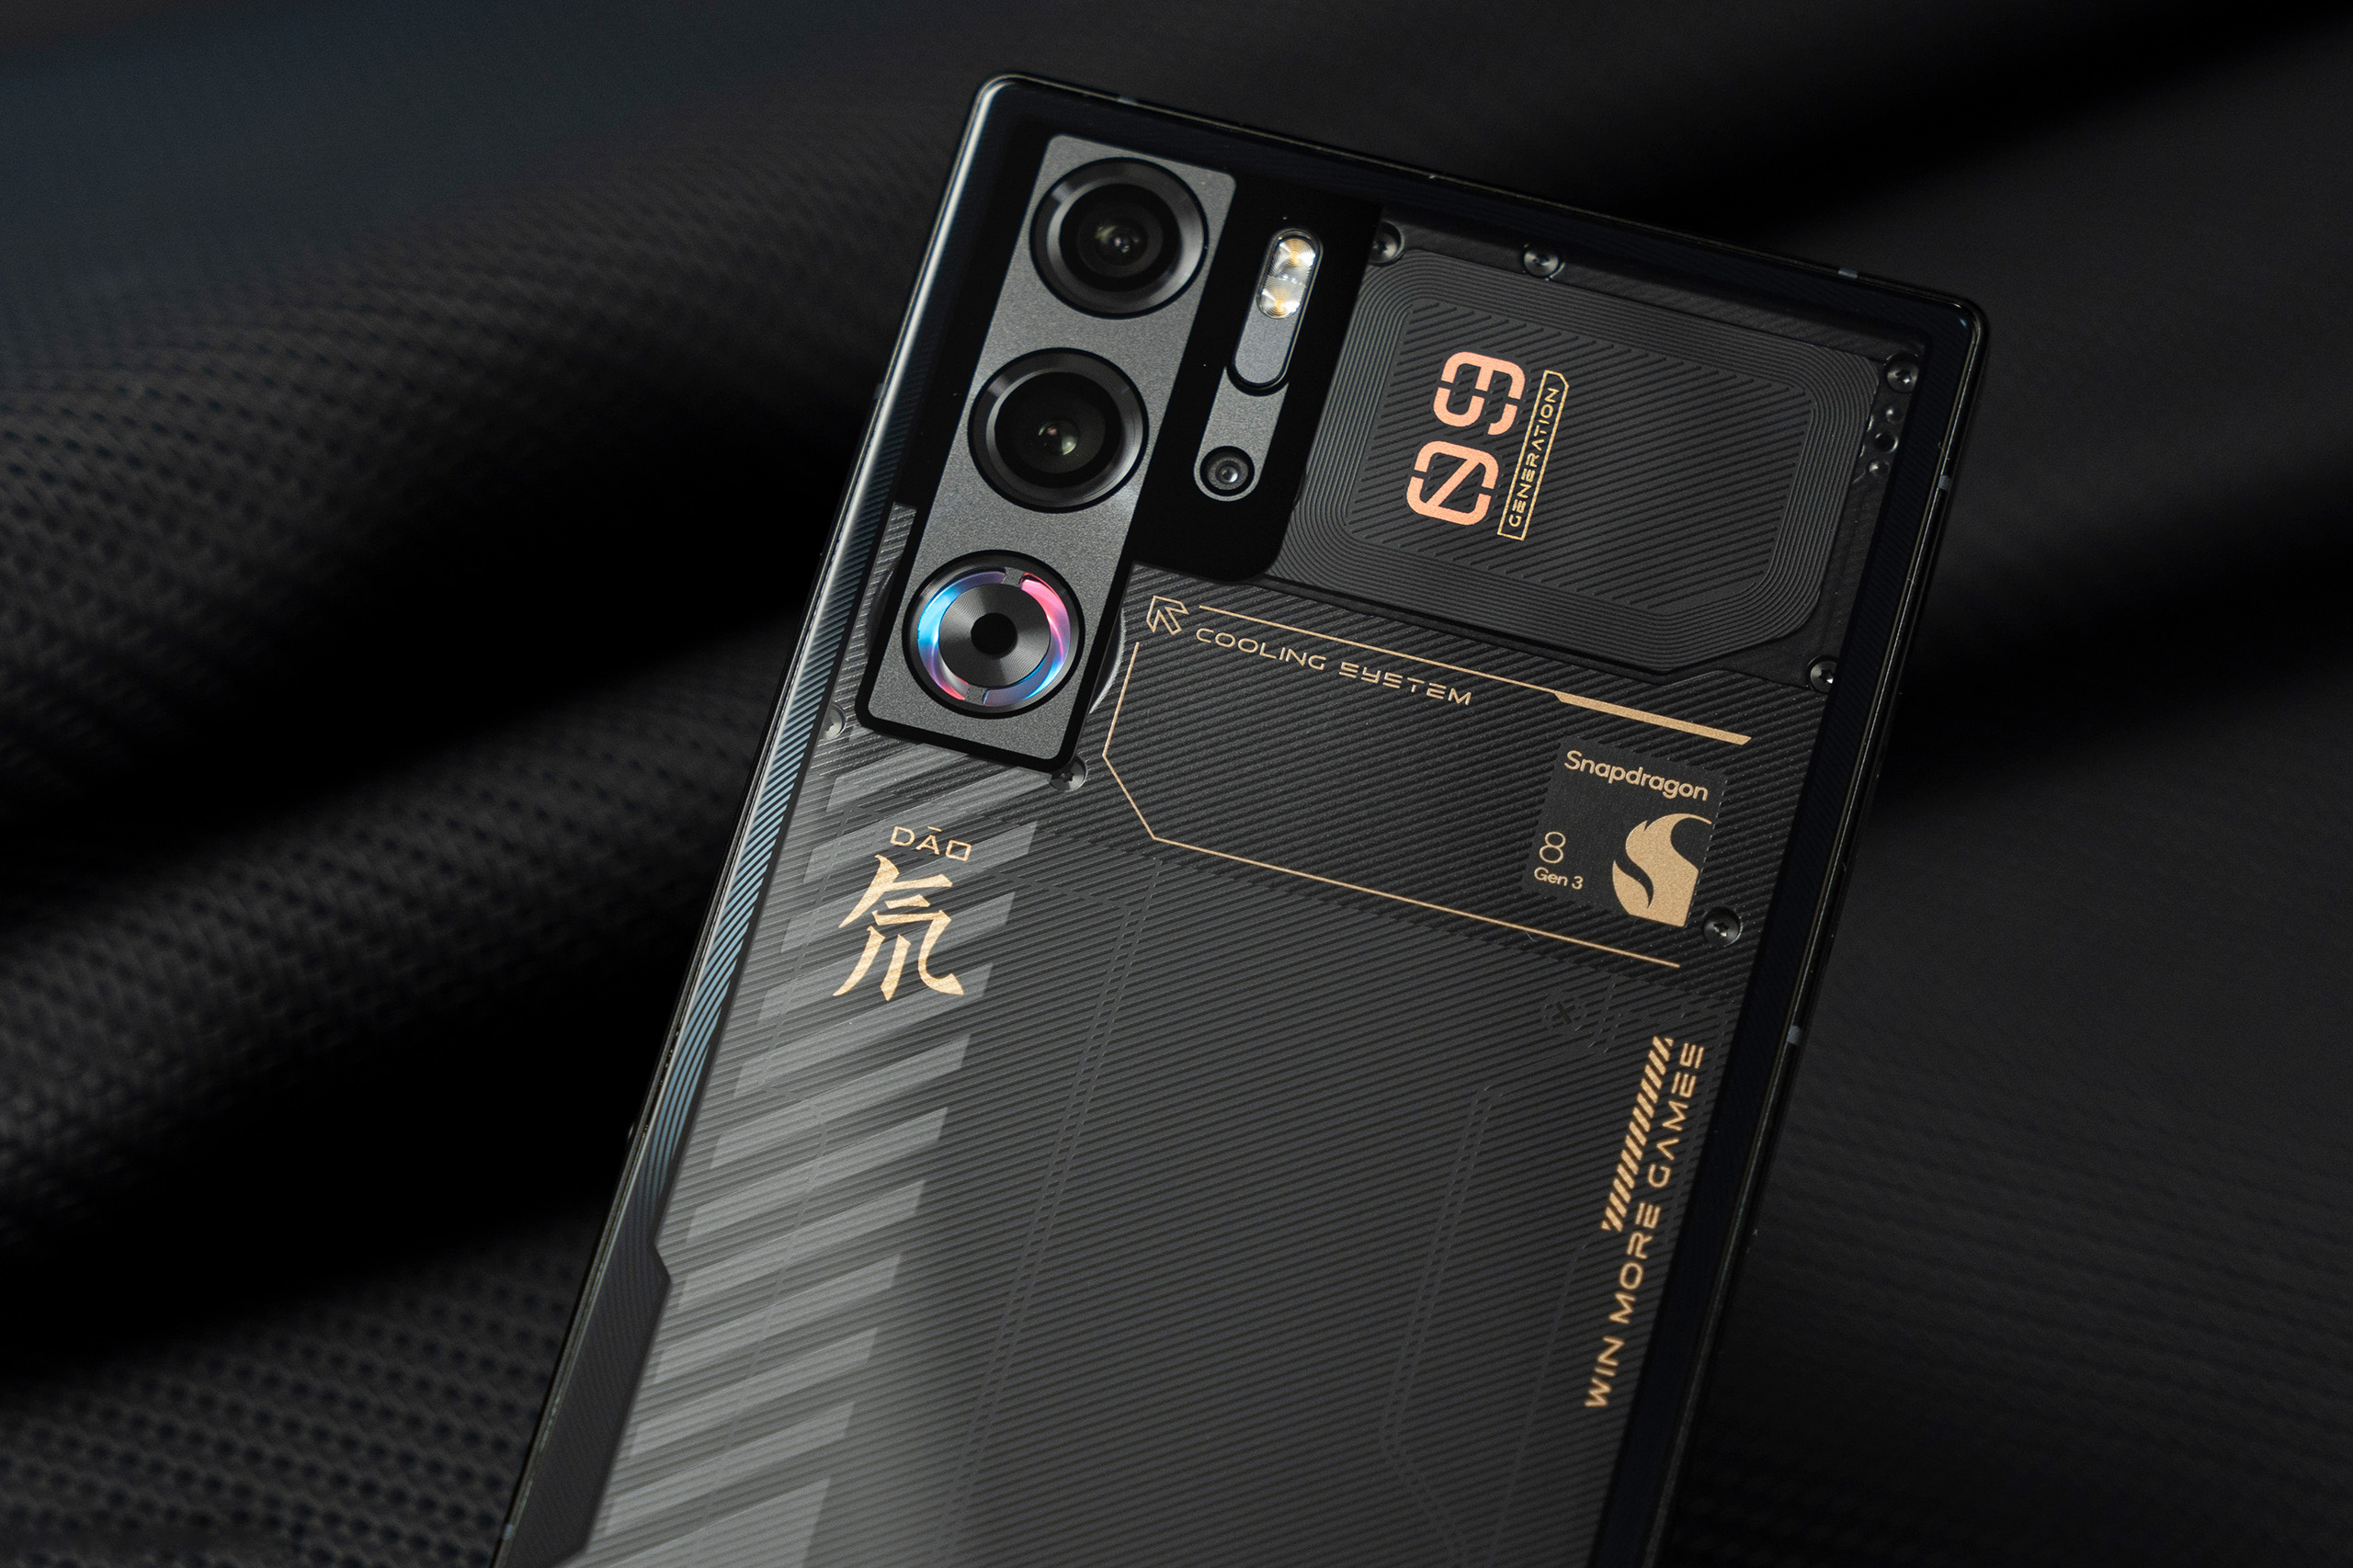 The REDMAGIC 9 Pro mobile gaming phone has advanced performance